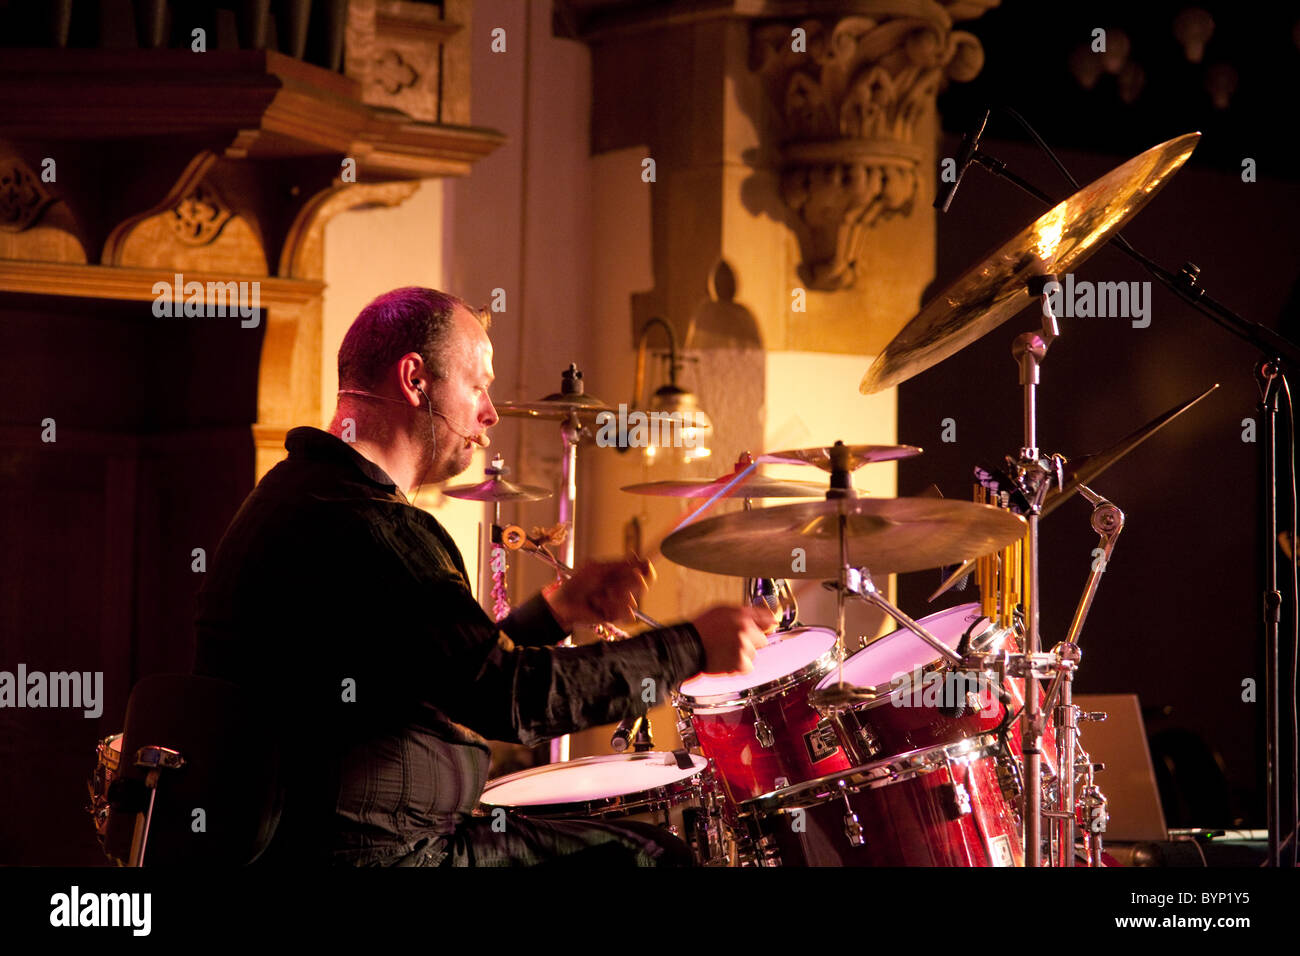 The drummer Frank van Essen with the Celtic Rock band Iona in concert, playing the drums on stage, the UK 2010 Stock Photo